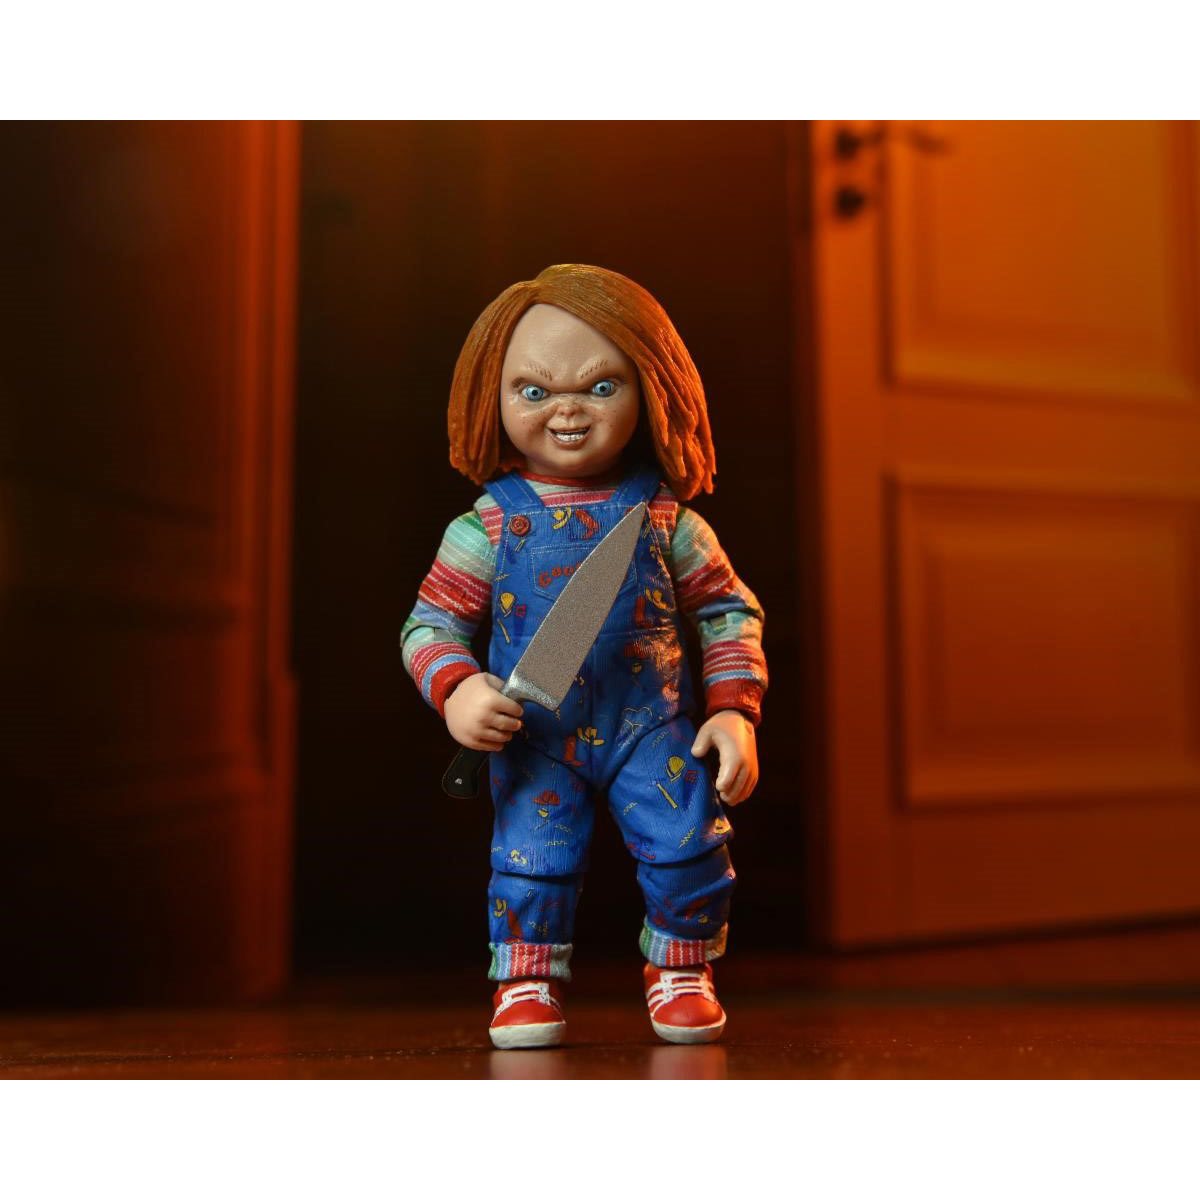 NECA - Chucky TV Series Ultimate Chucky 7-Inch Scale Action Figure